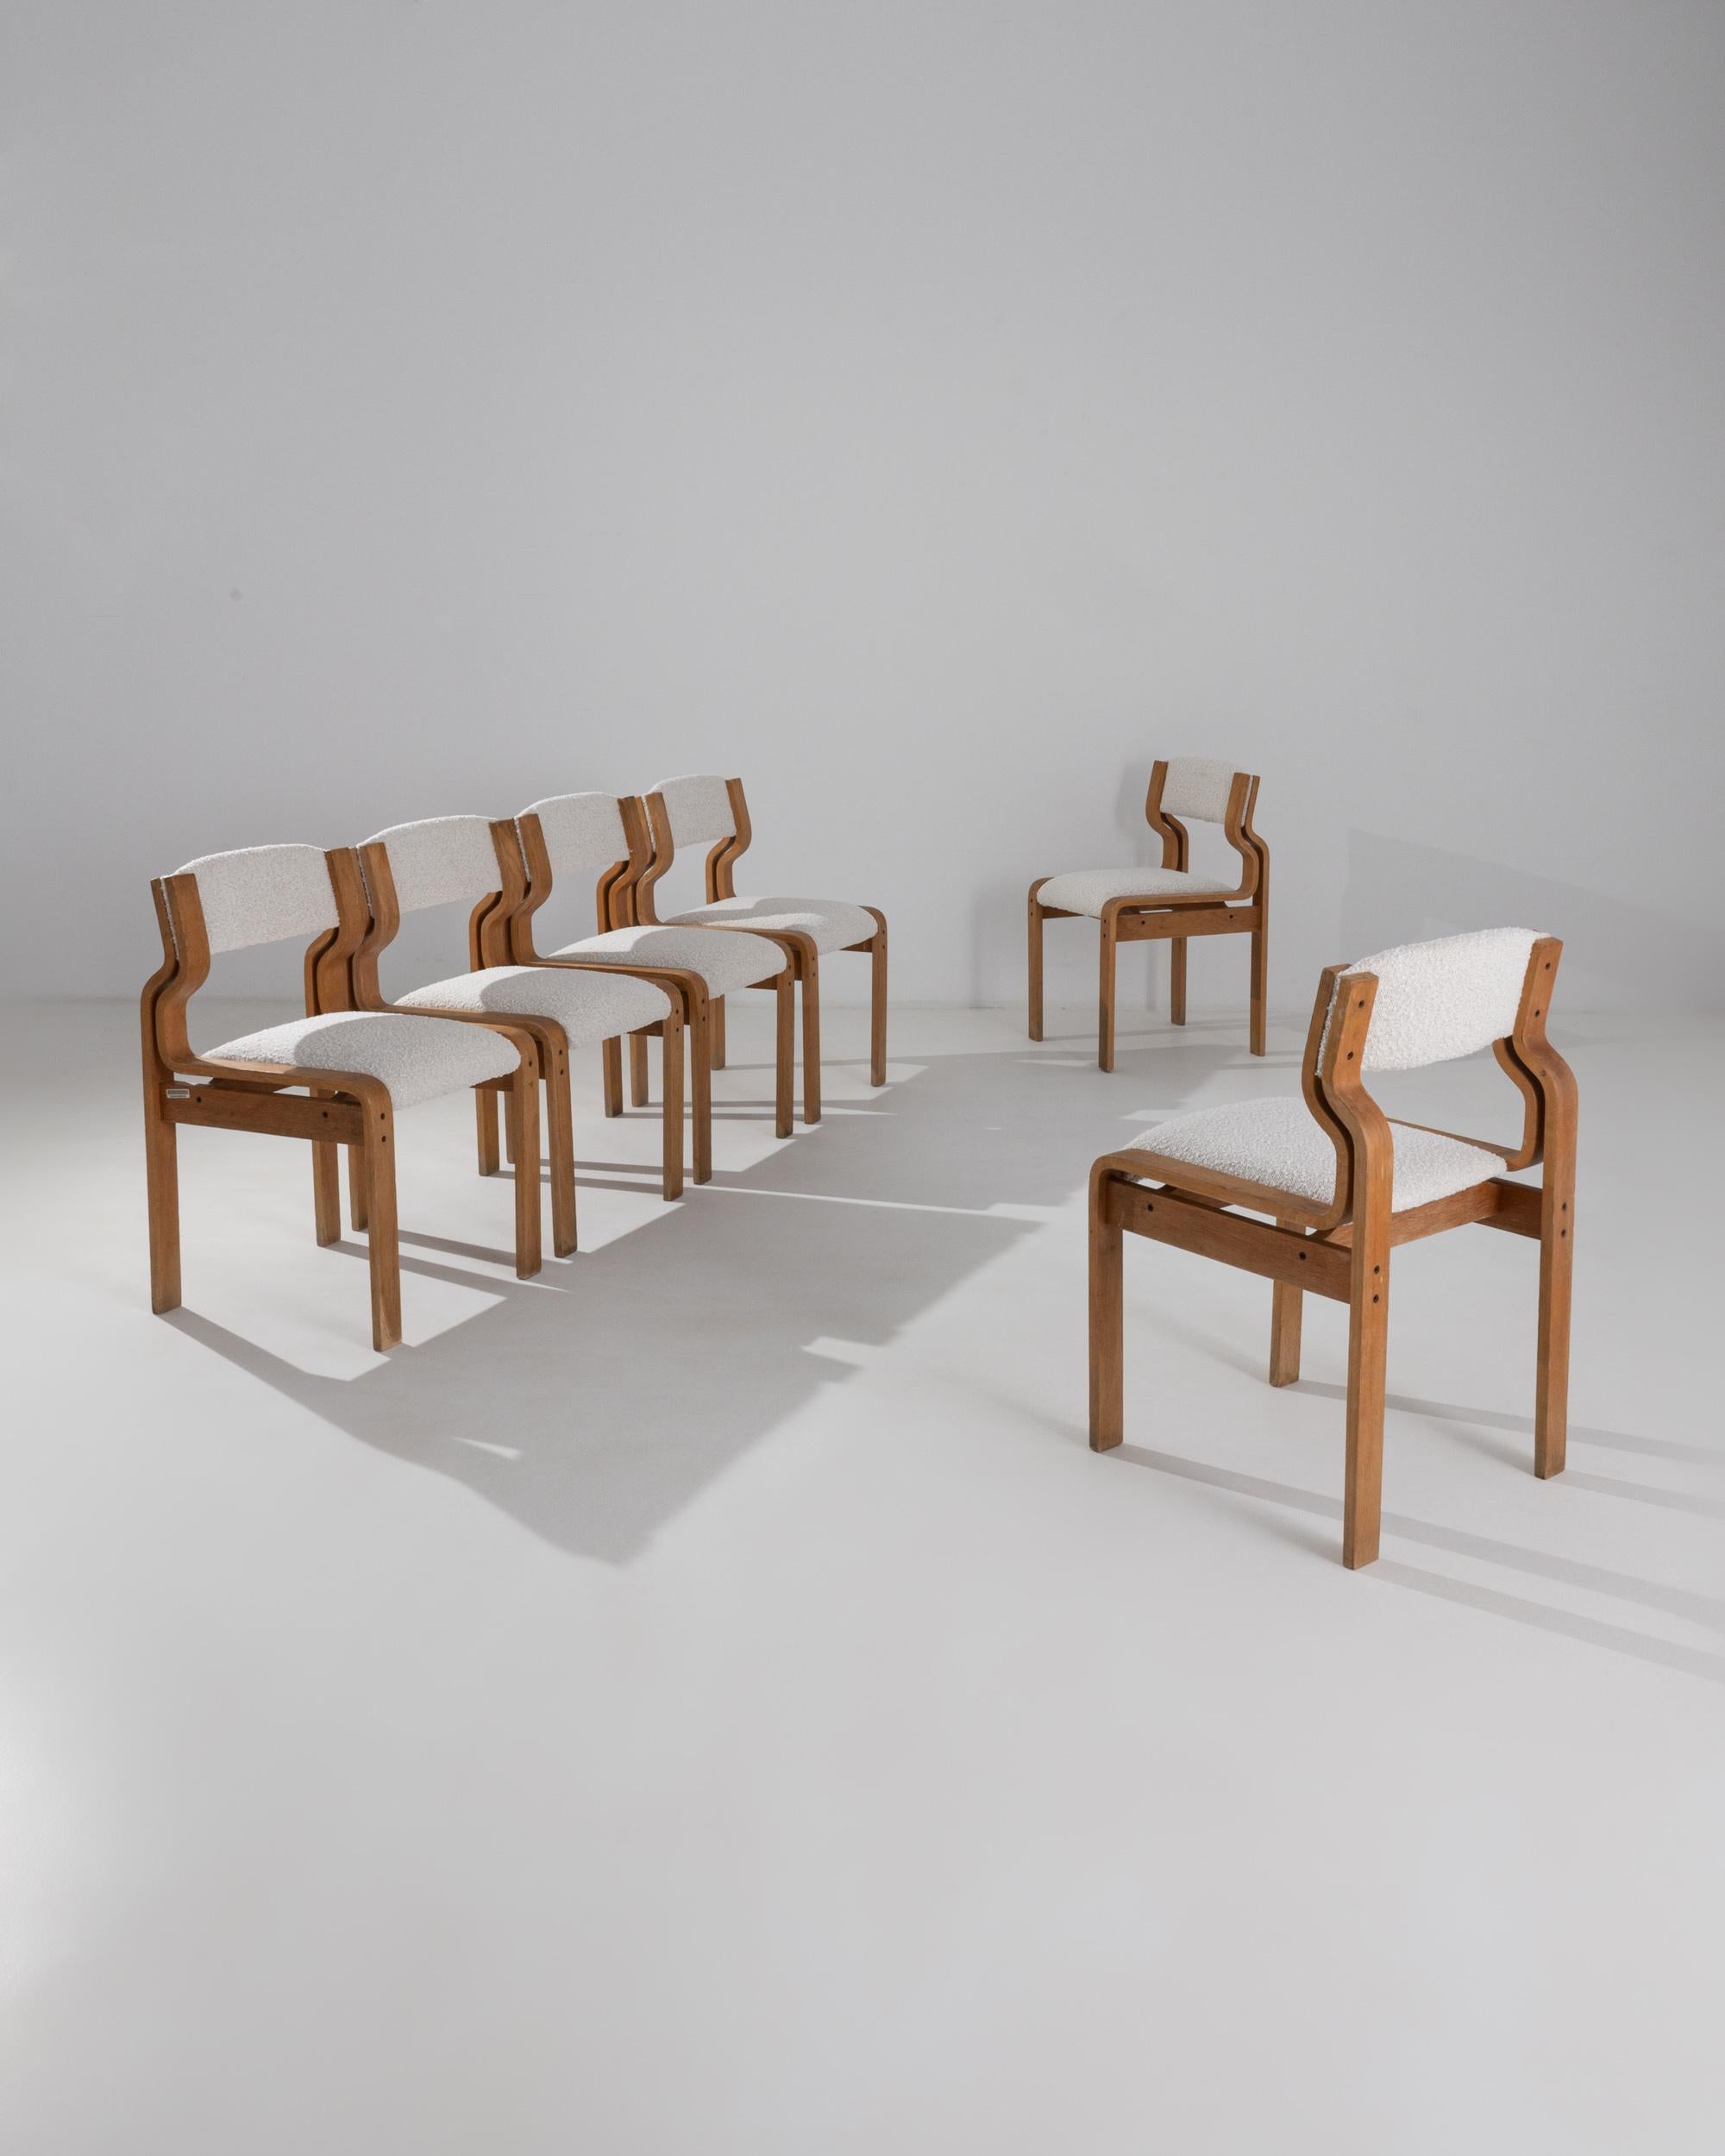 This set of six wooden dining chairs was made in the 1970s by renowned Czech Mid-Century Modern designer, Ludvik Volák. Many of his most acclaimed designs featured an innovative use of molded plywood which enabled him to create new and unusual